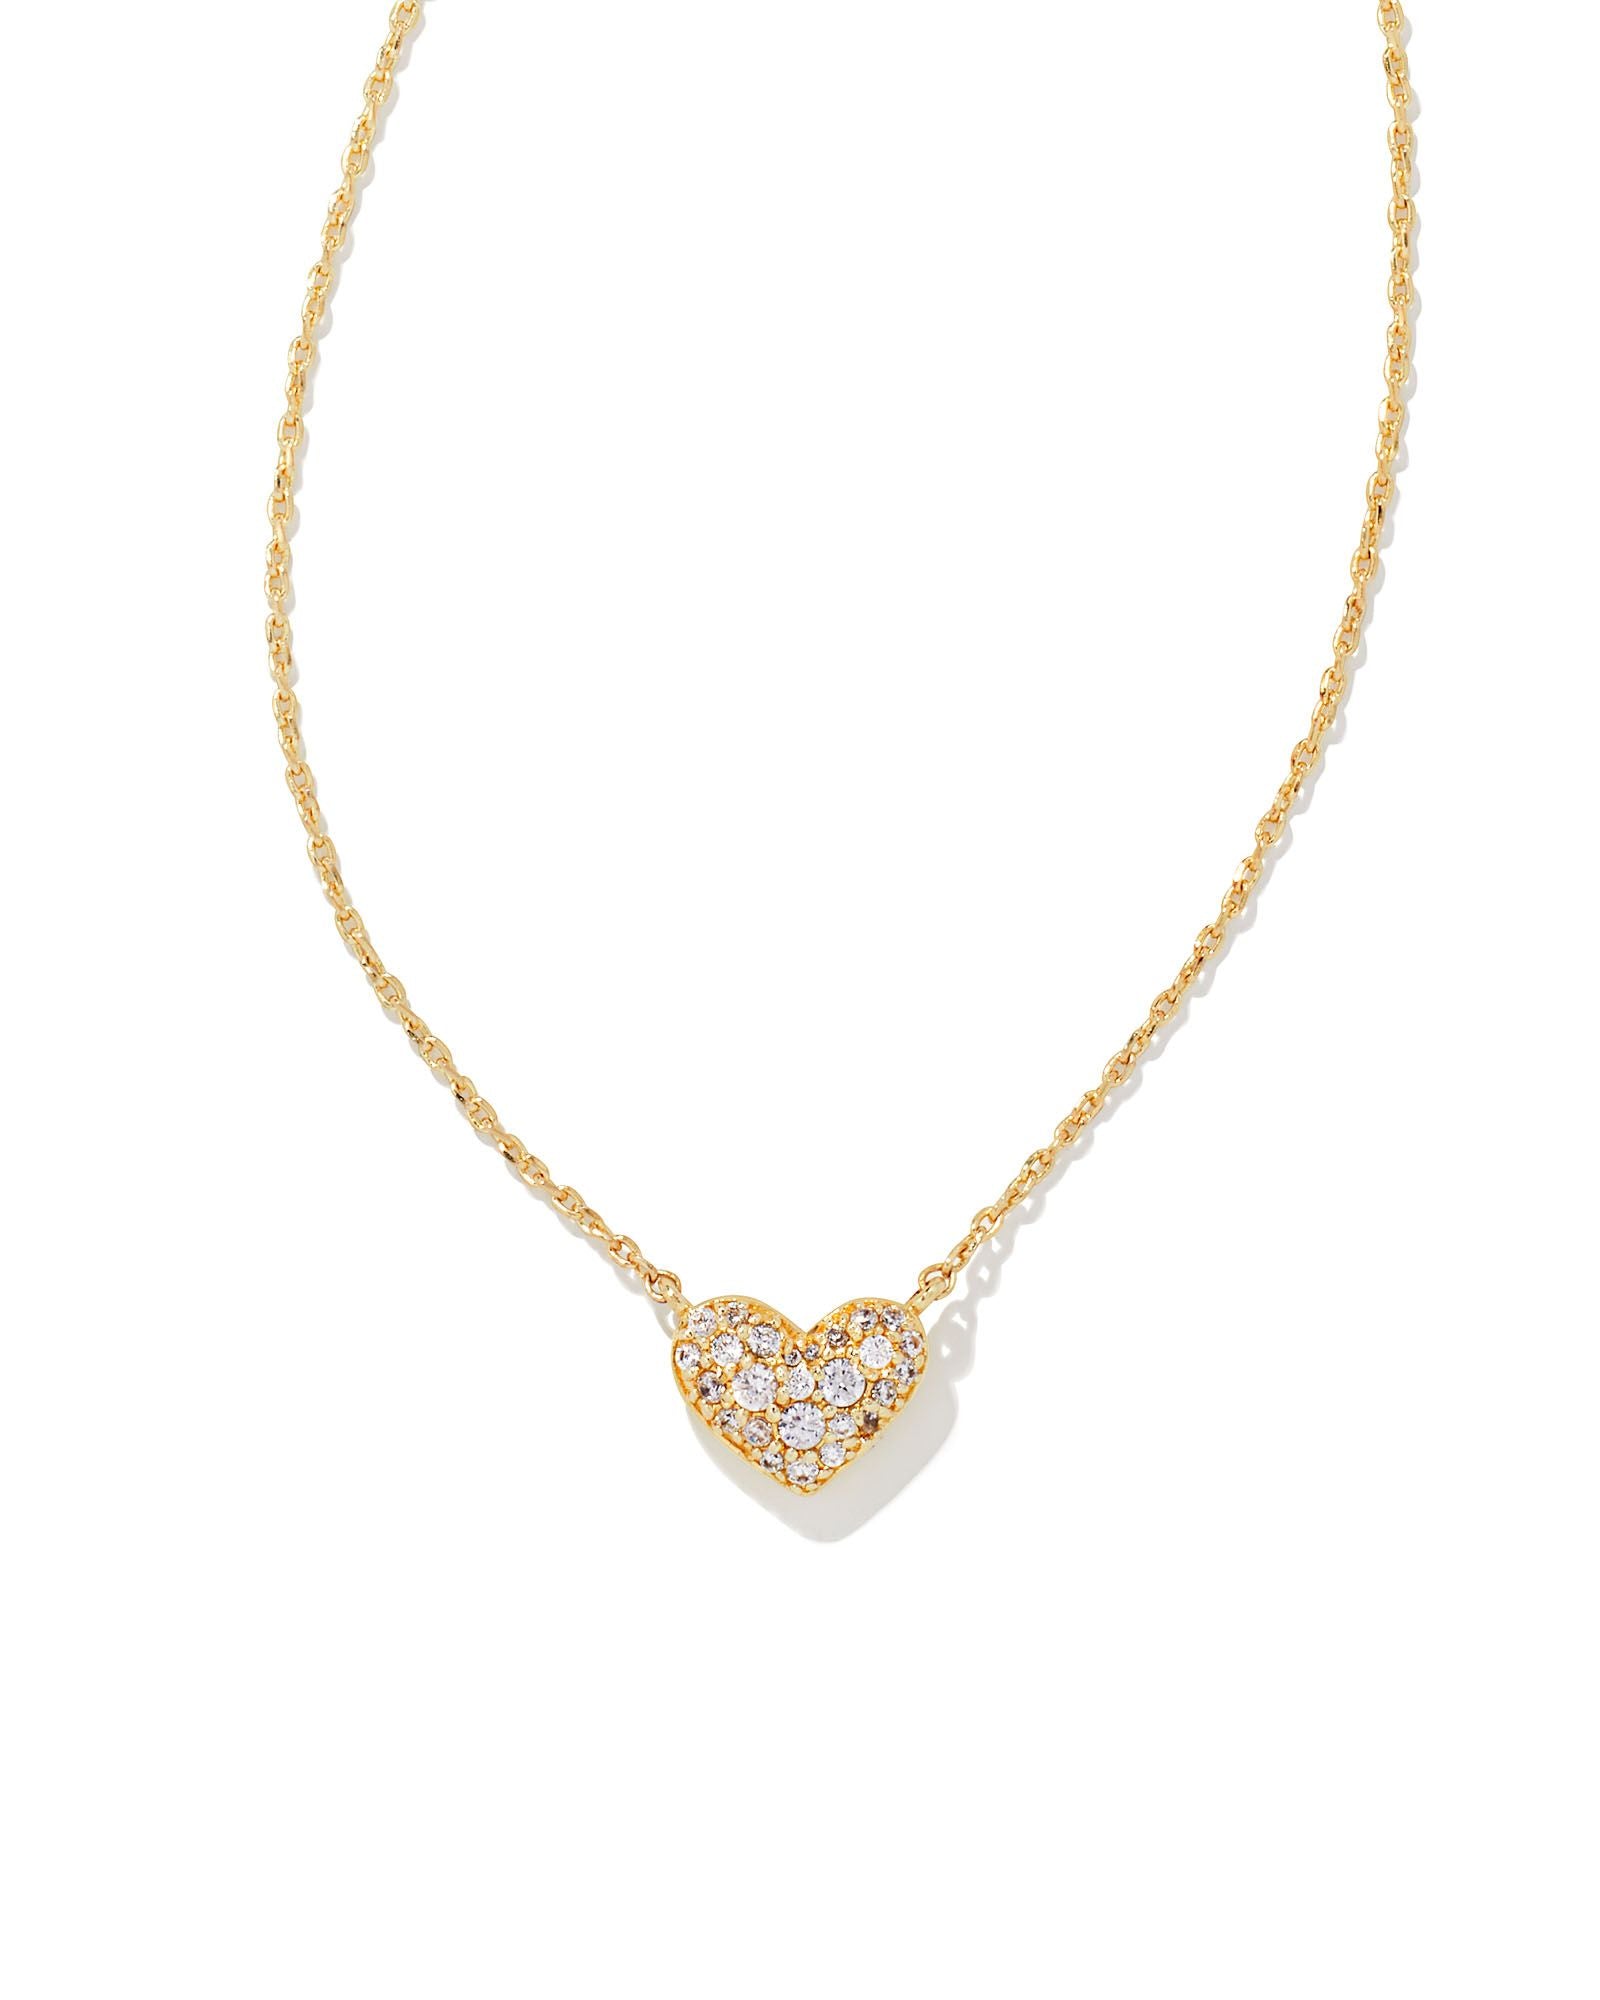 Ari Pave Crystal Heart Necklace in Gold Metal White CZ